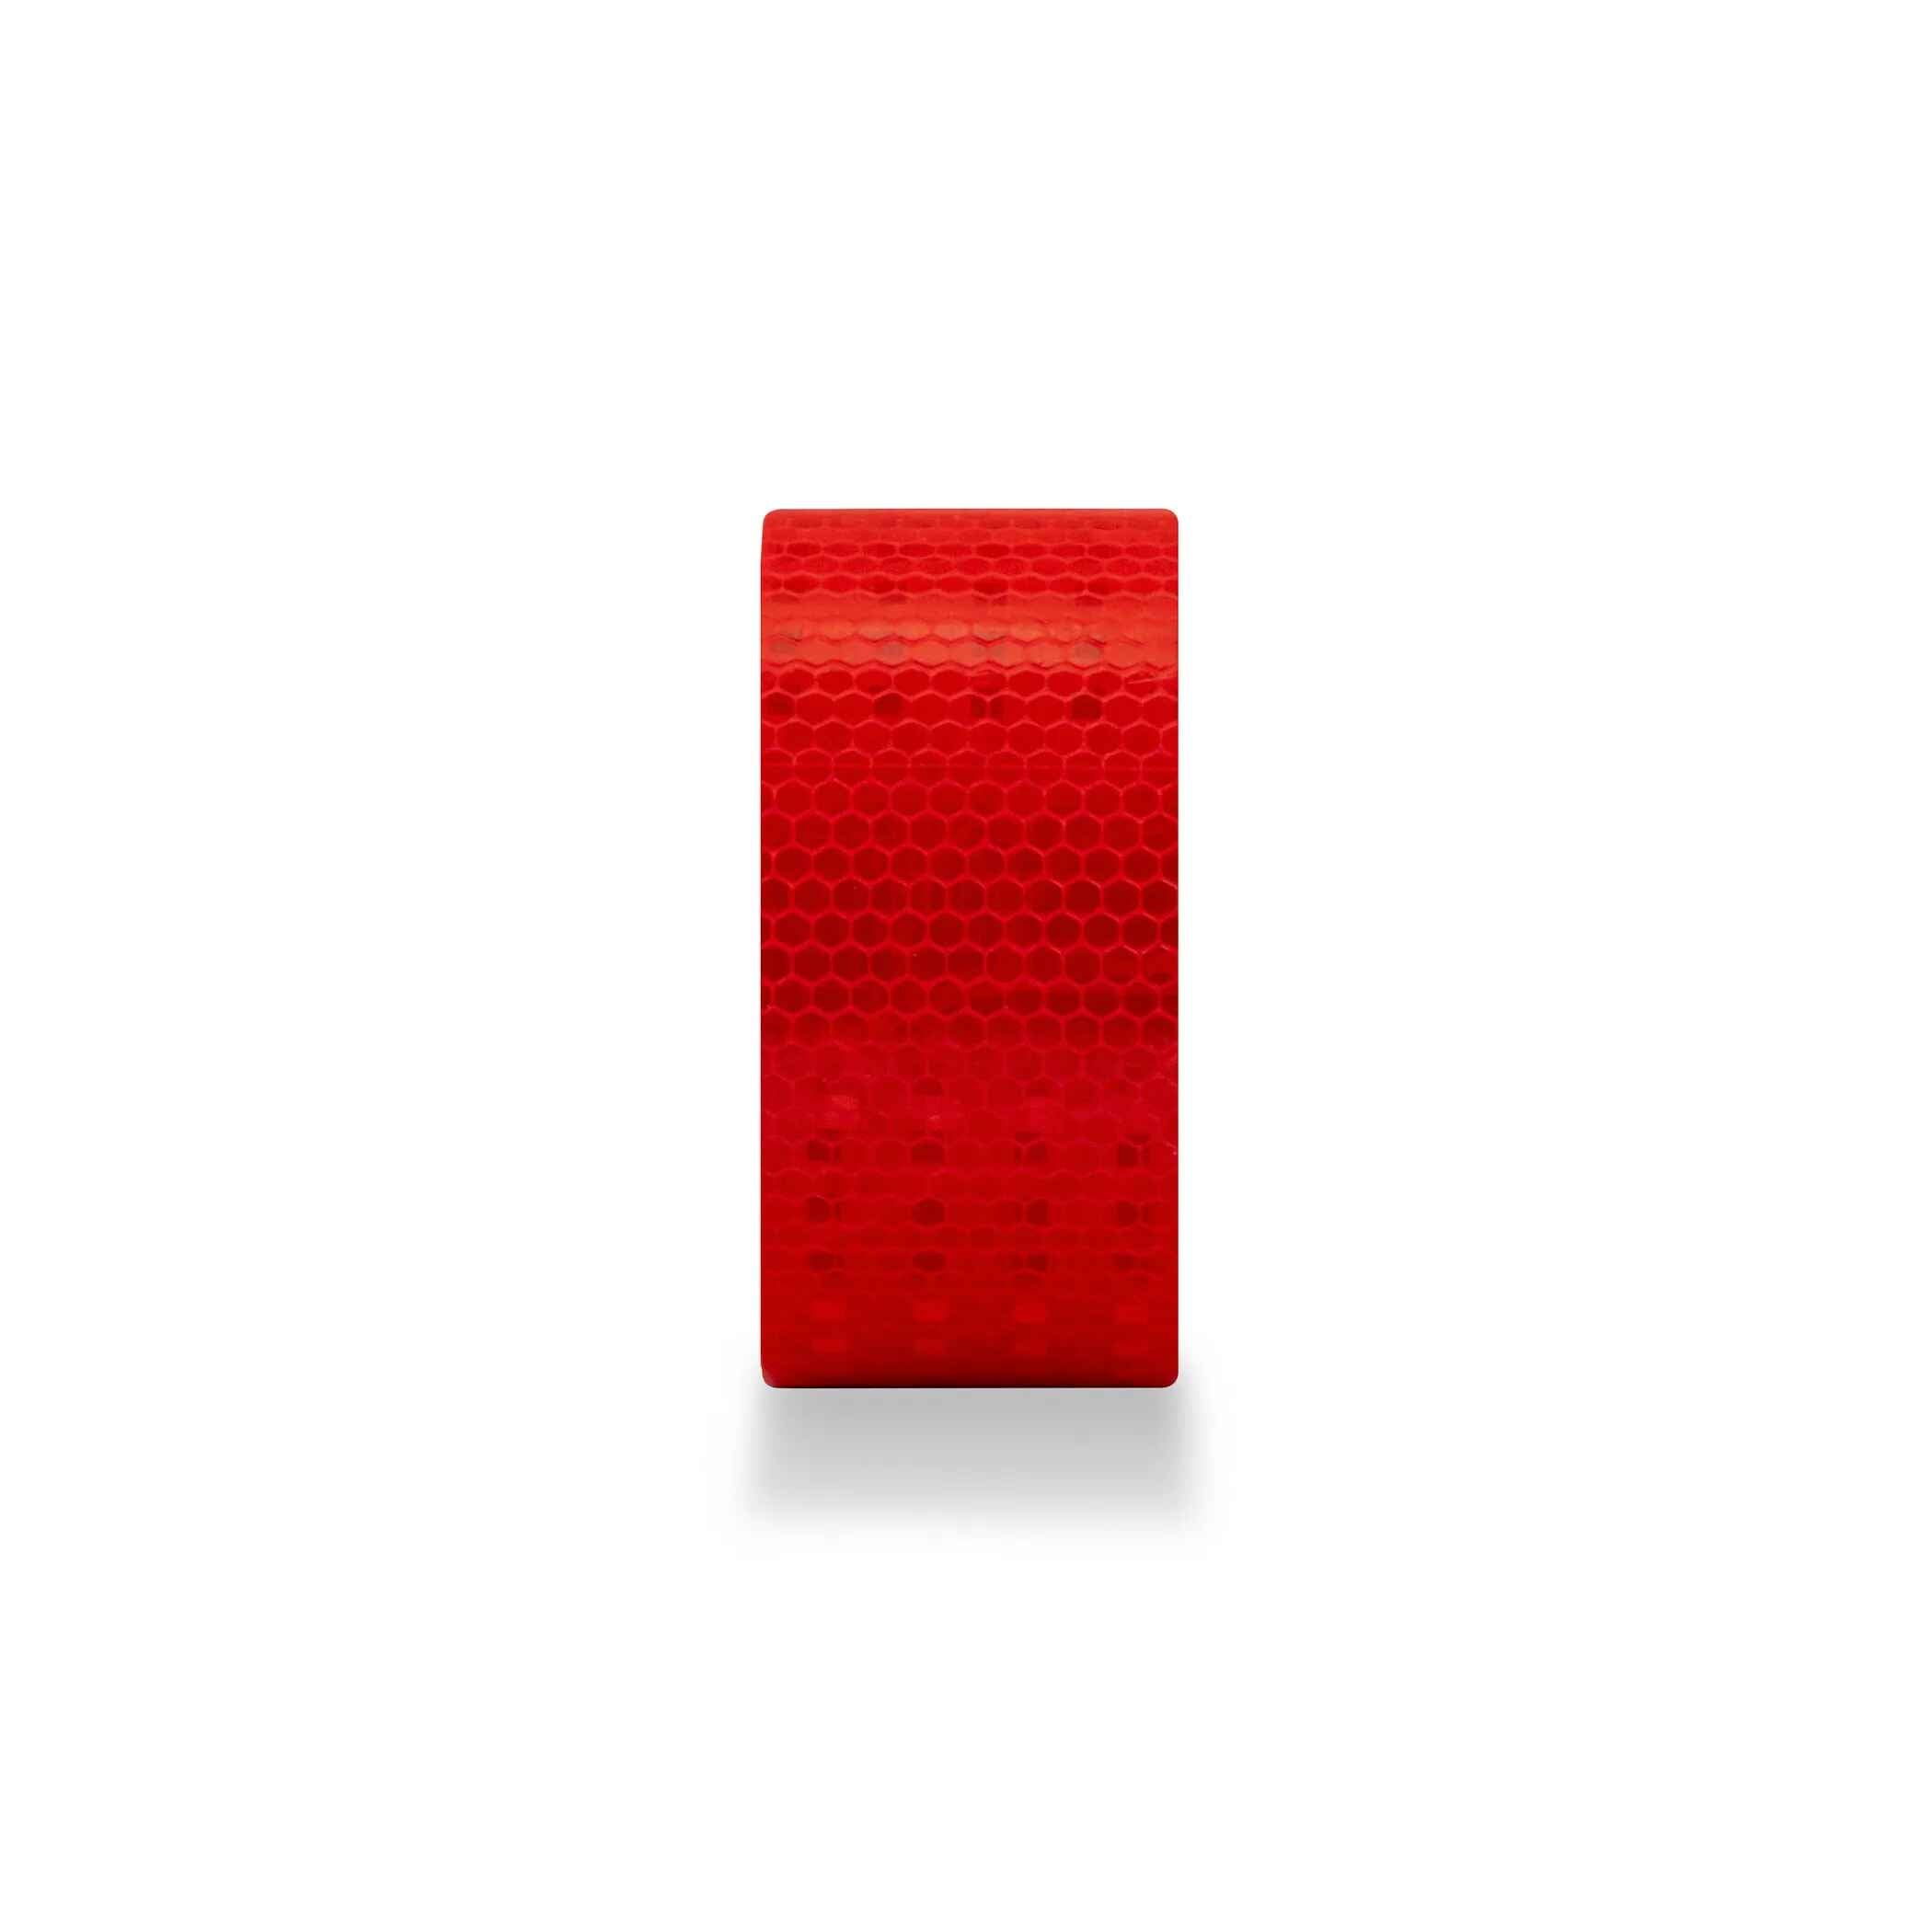 HEXFLECTIVE™ Reflective Tape. 2"x 30'. Red Honeycomb Pattern - Defender Safety